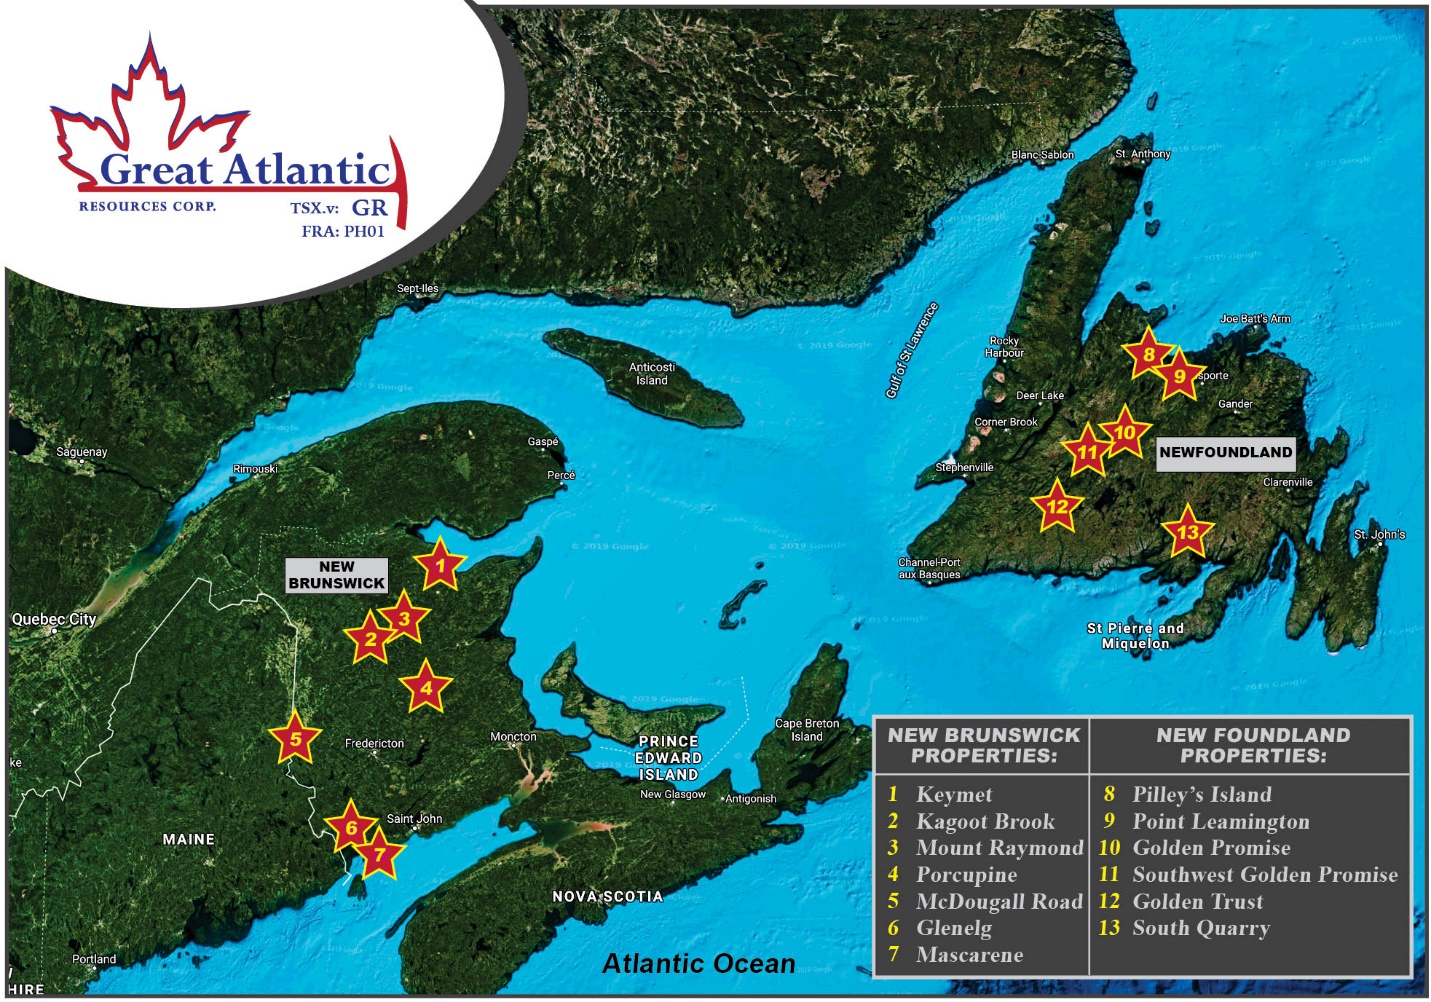 Great Atlantic Resources Corp., Wednesday, March 3, 2021, Press release picture